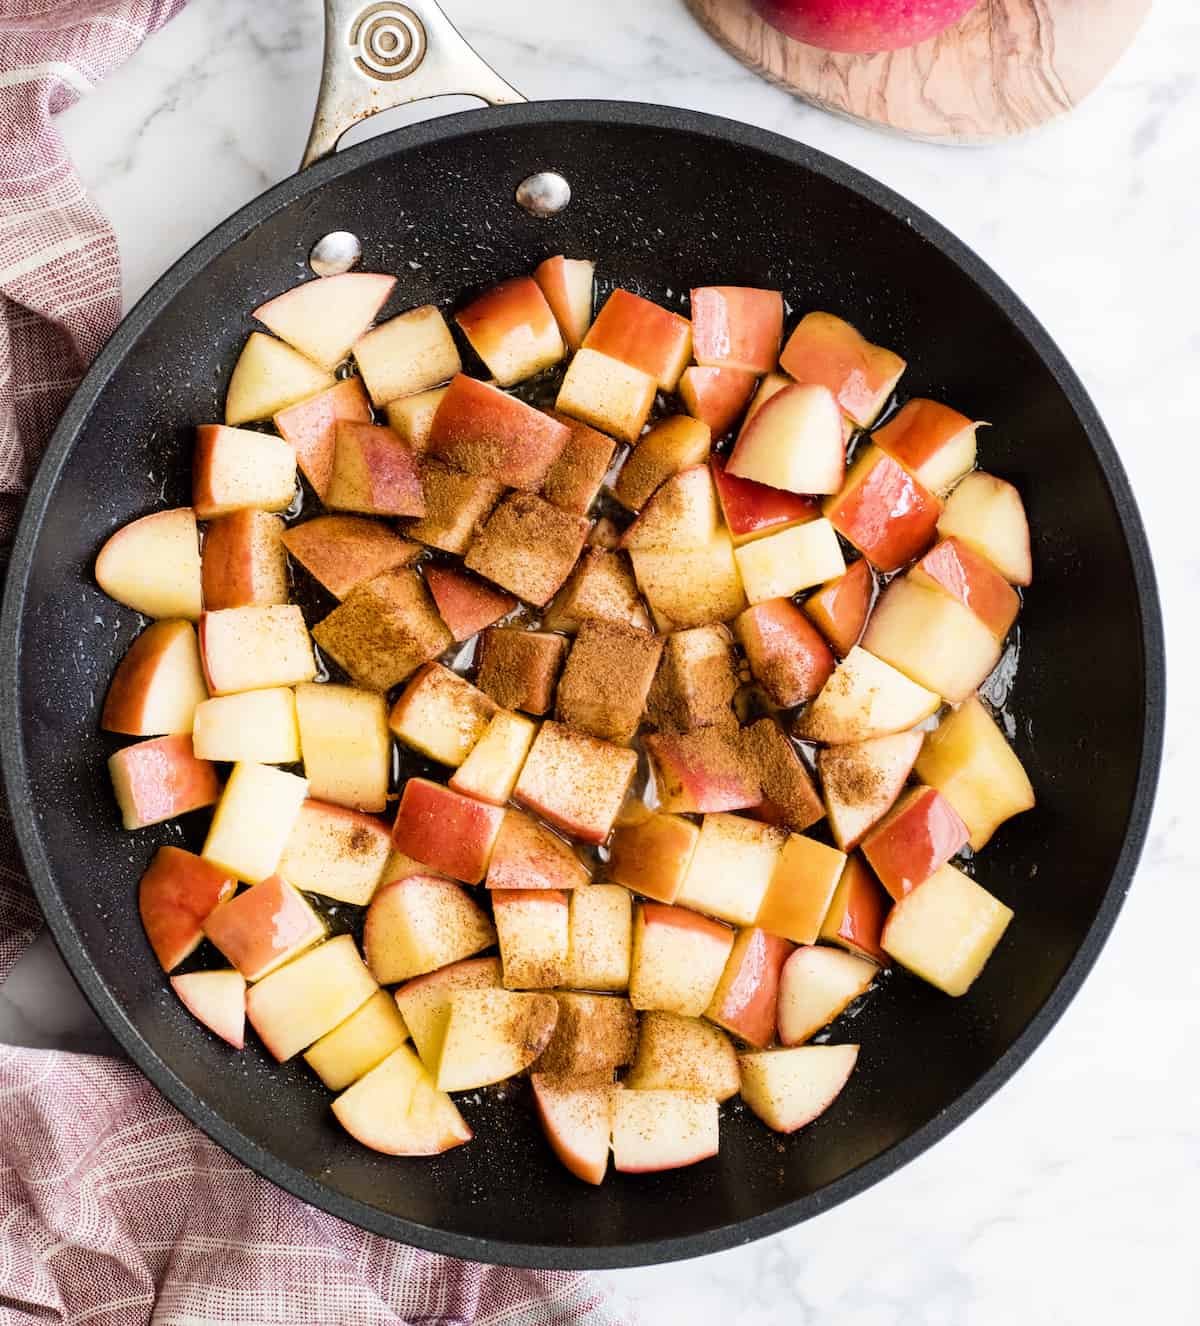 Overhead view of adding cinnamon to apples in a black fry pan showing how to make cinnamon apples